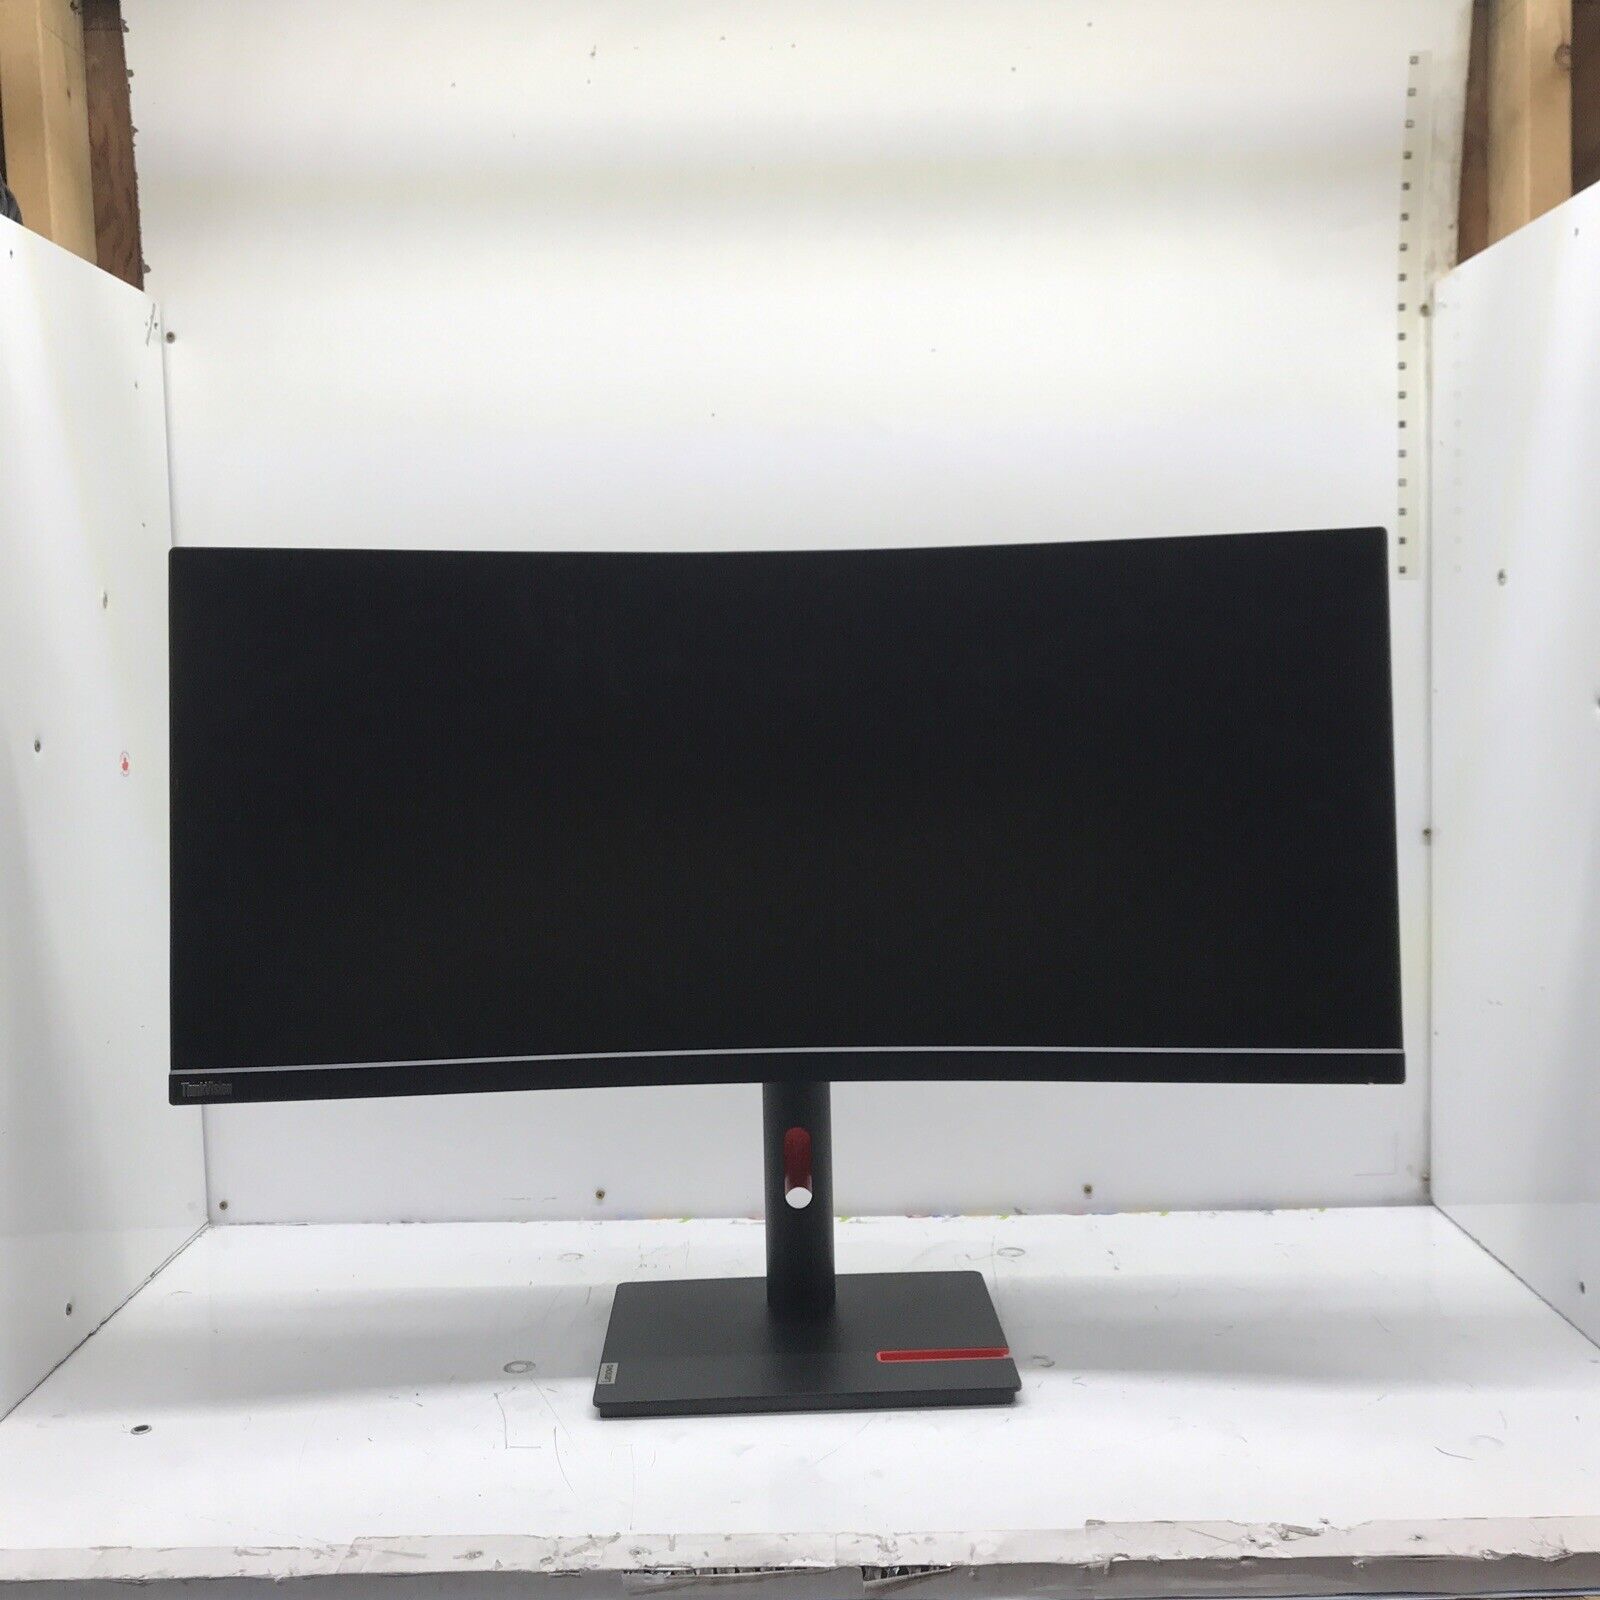 Lenovo ThinkVision 34 inch Curved Monitor - T34w-30 cracked screen for parts